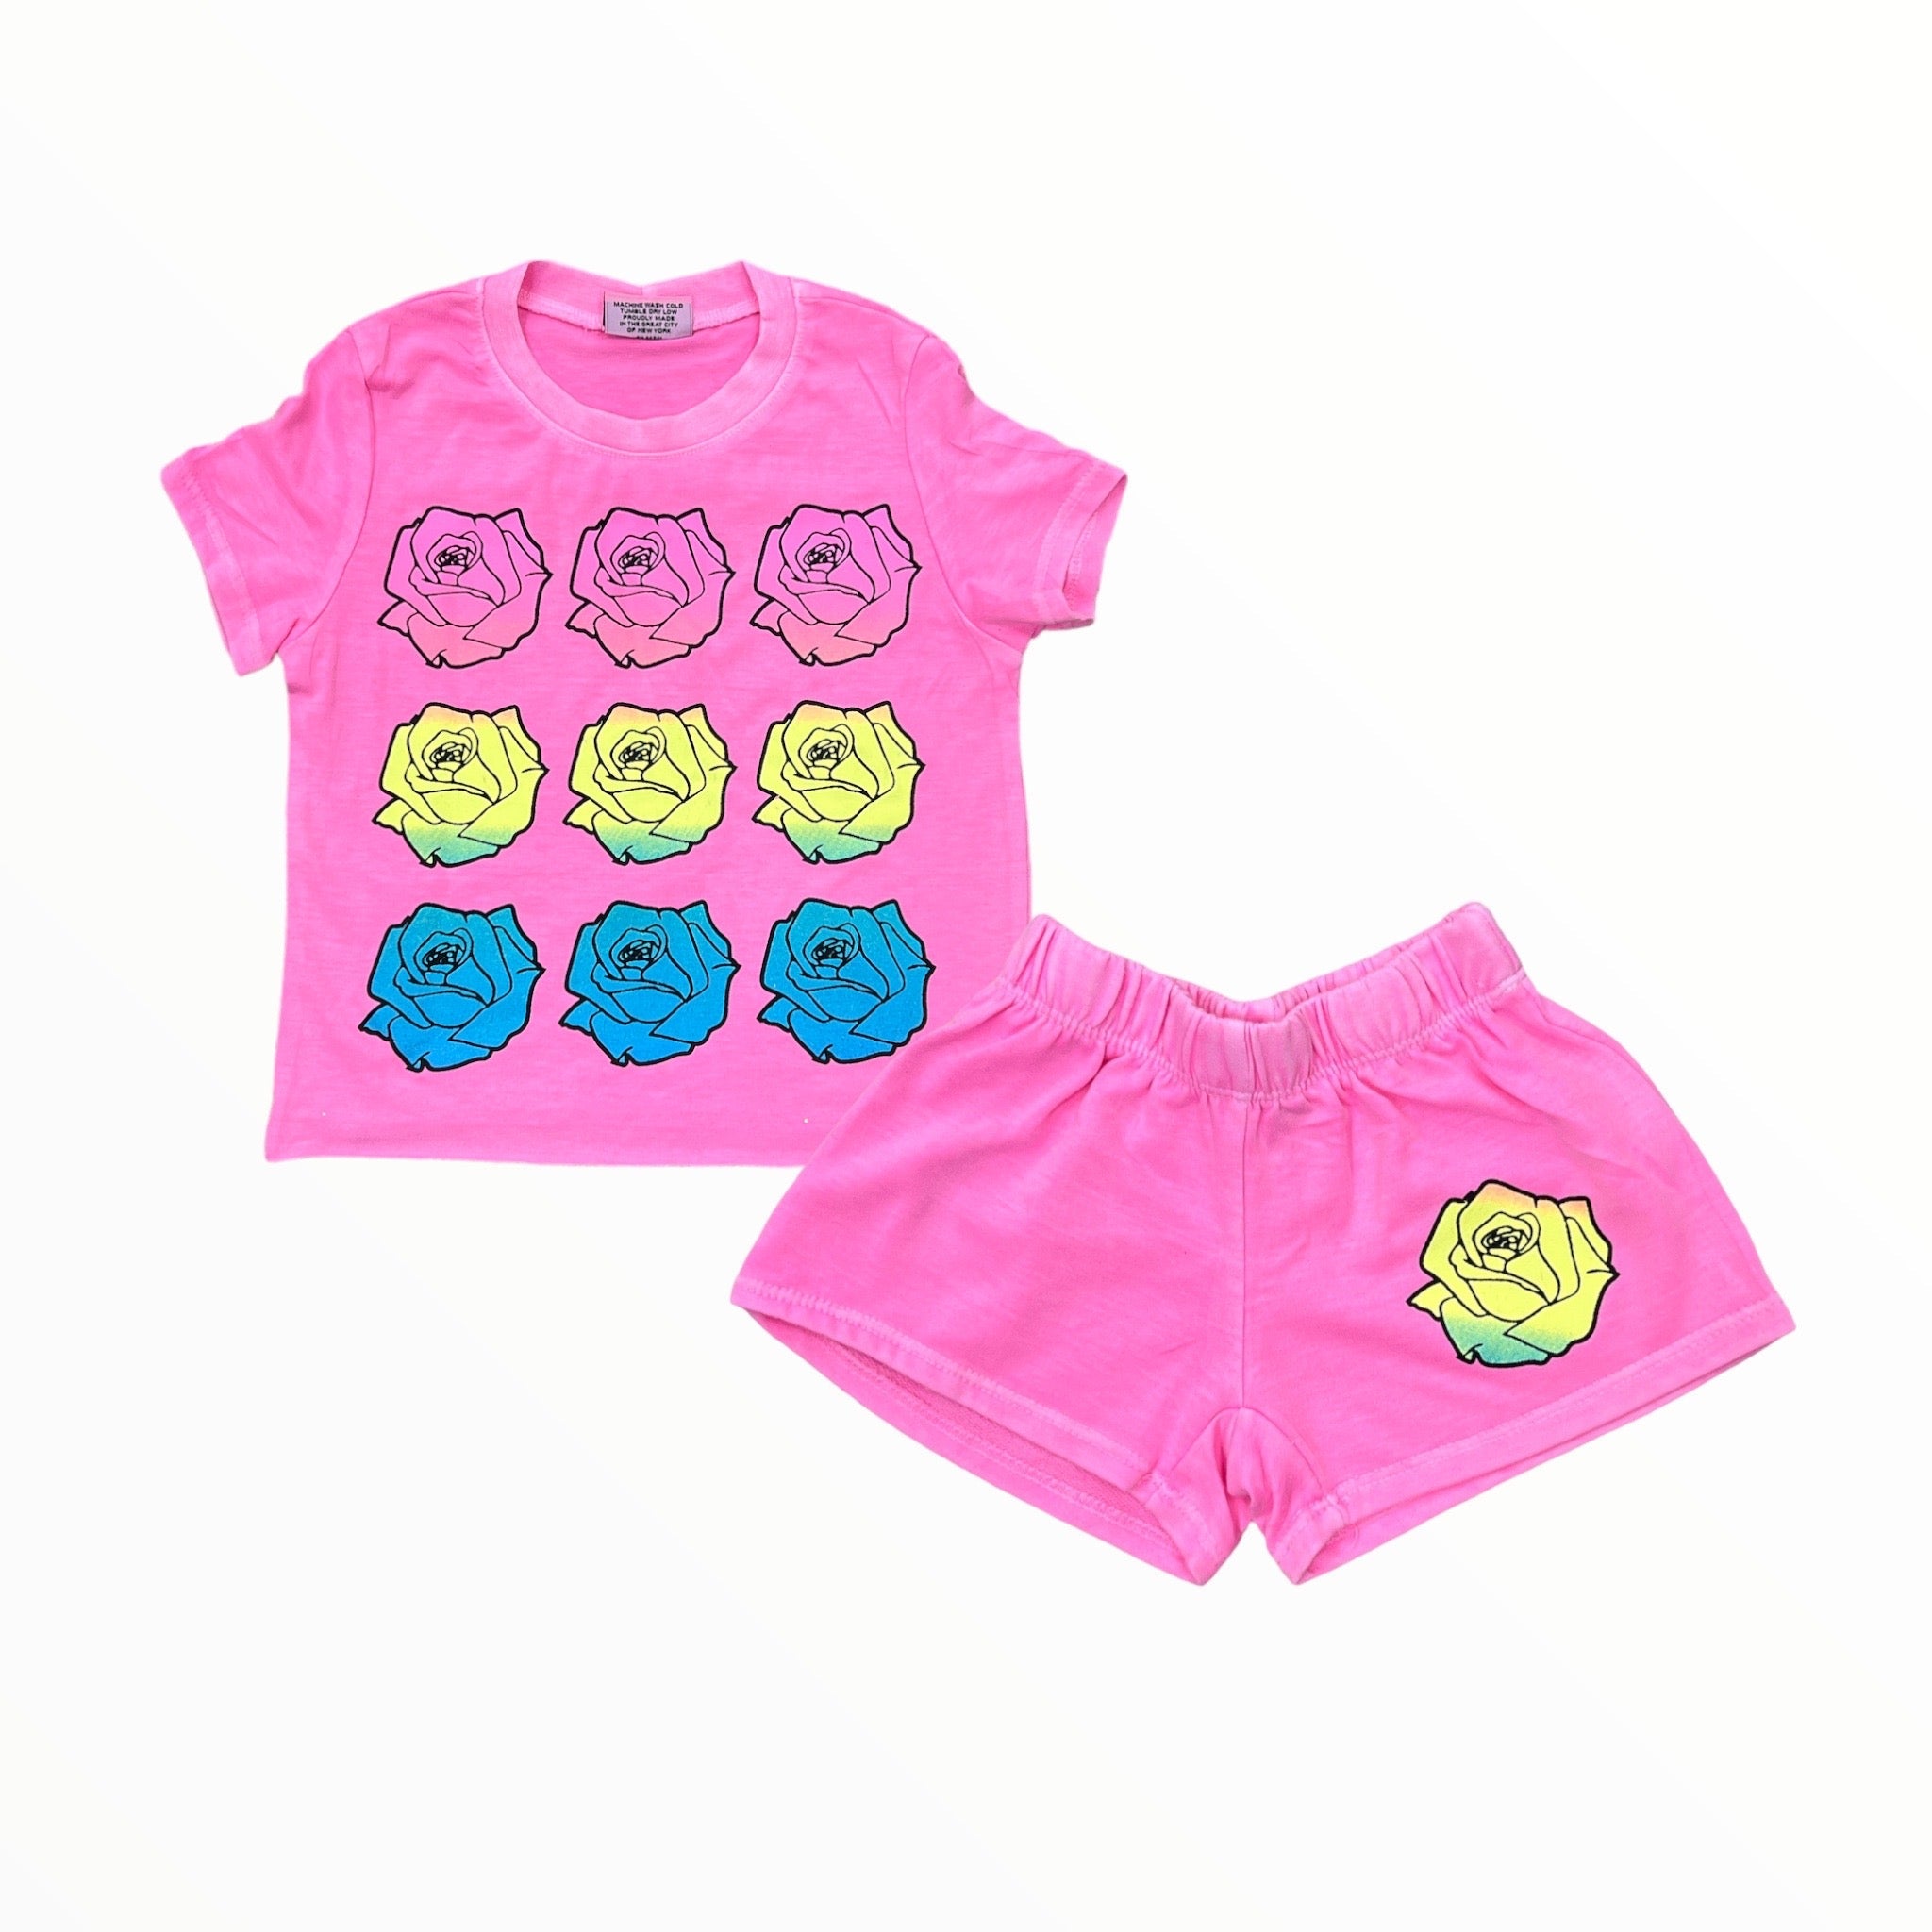 FIREHOUSE SHORT - NEON PINK/ROSES